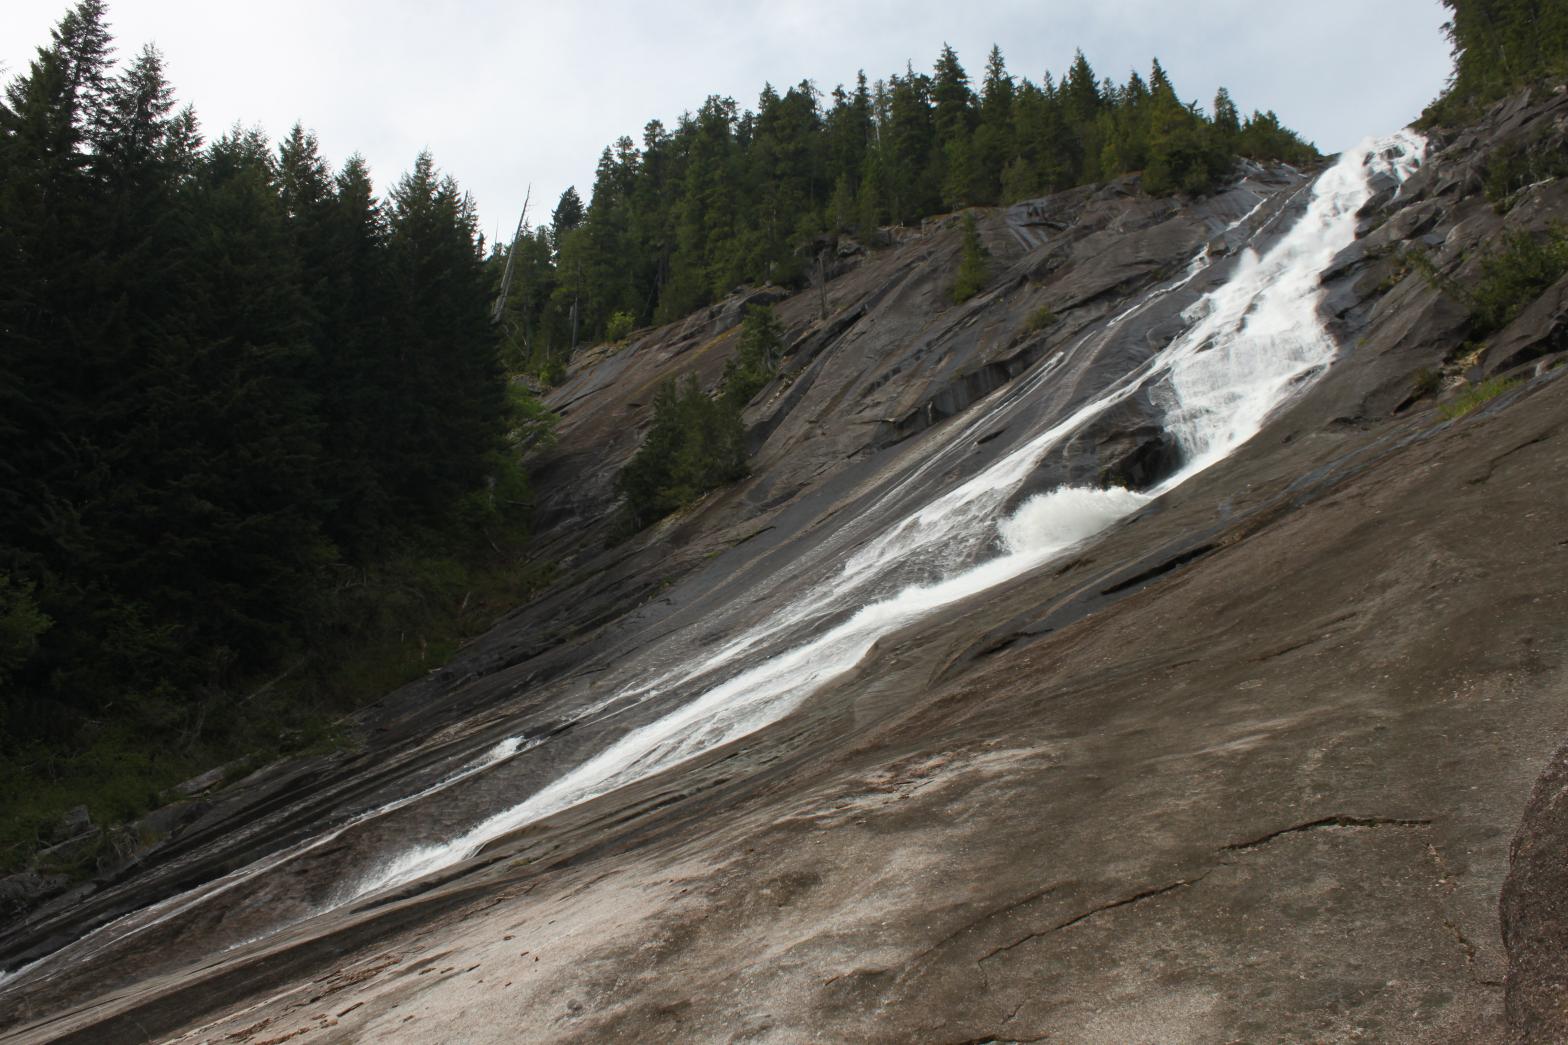 Otter Falls from the base